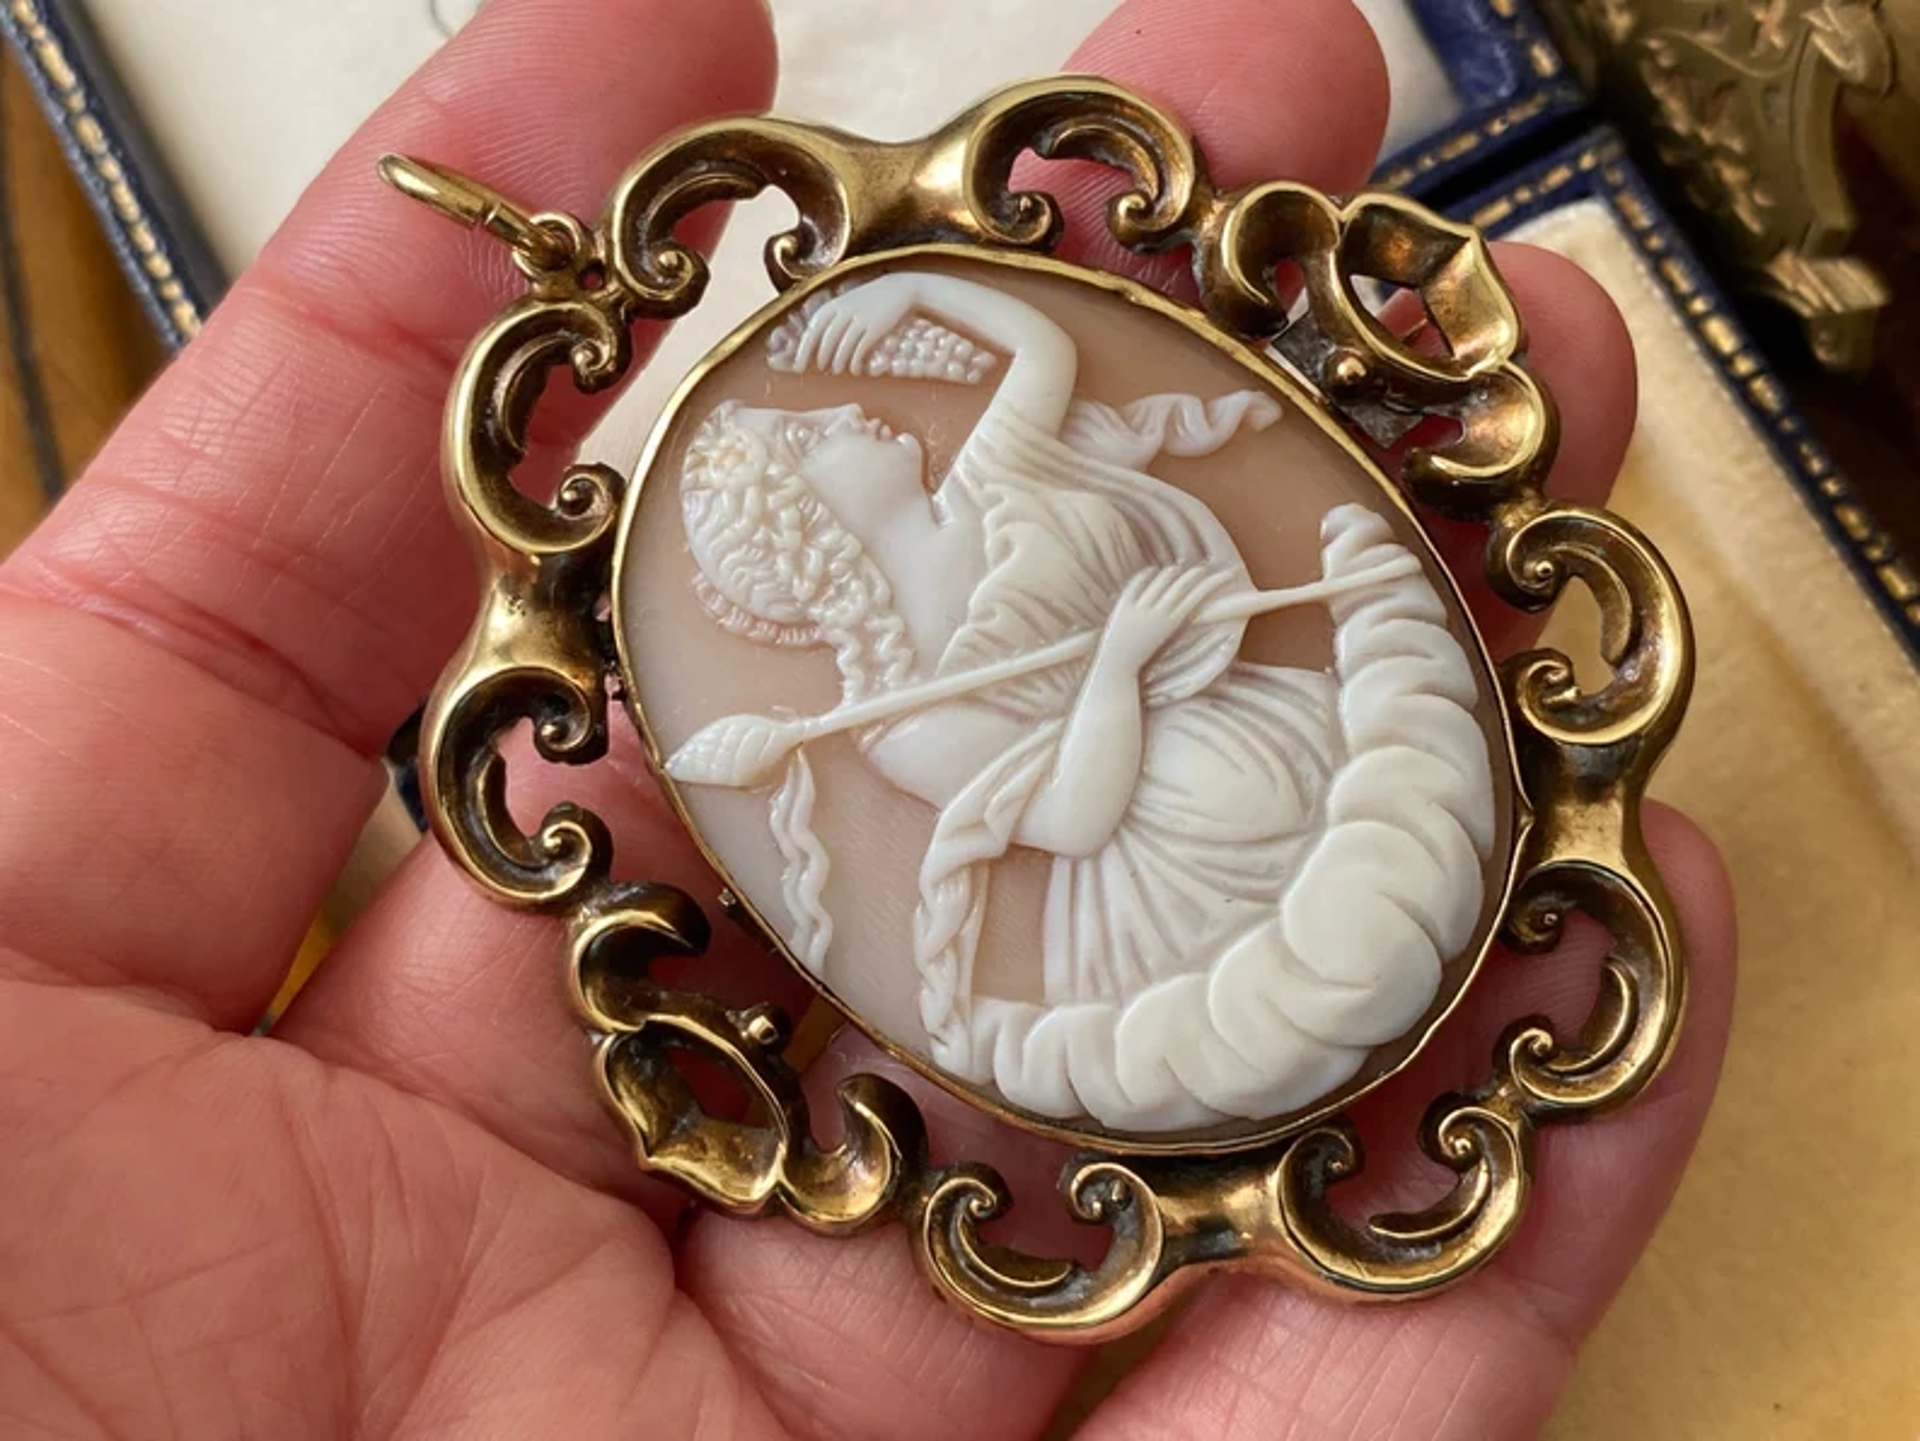 Antique Victorian /Edwardian Italian carved shell cameo roman Goddess Bacchante brooch/pin/pendant, signed by Cameo